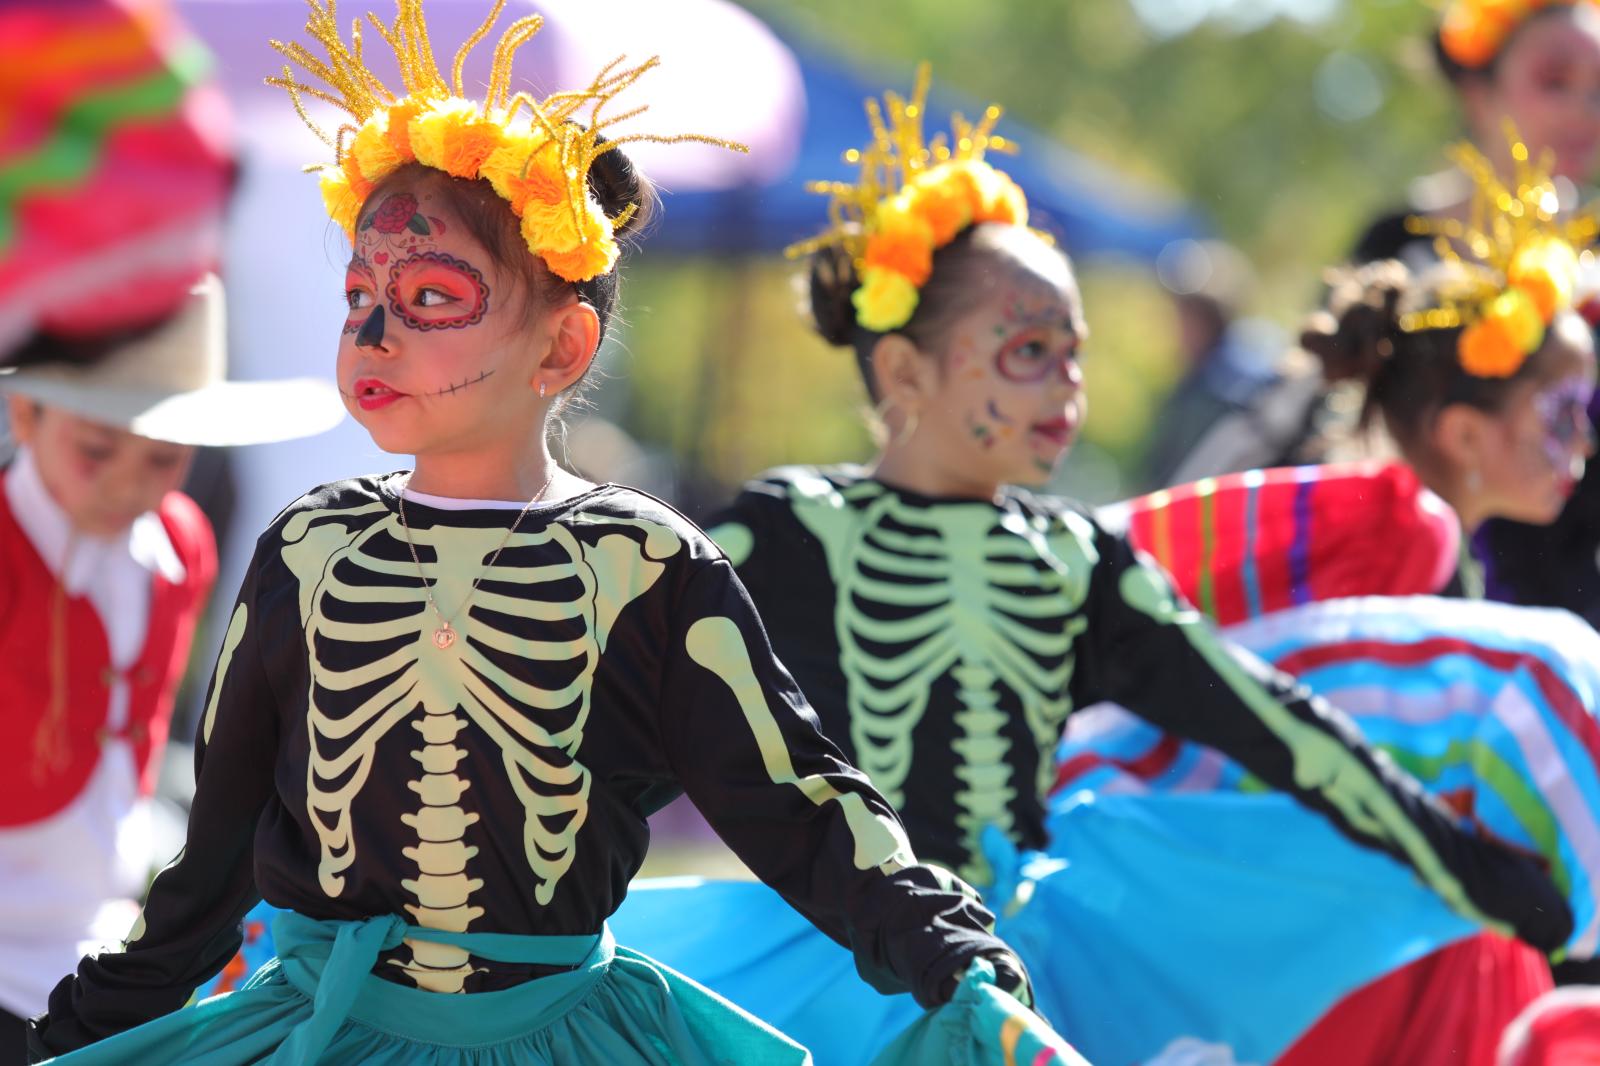 Upside Down Halloween Parade in Washington Park, Chicago ,  | Buy this image